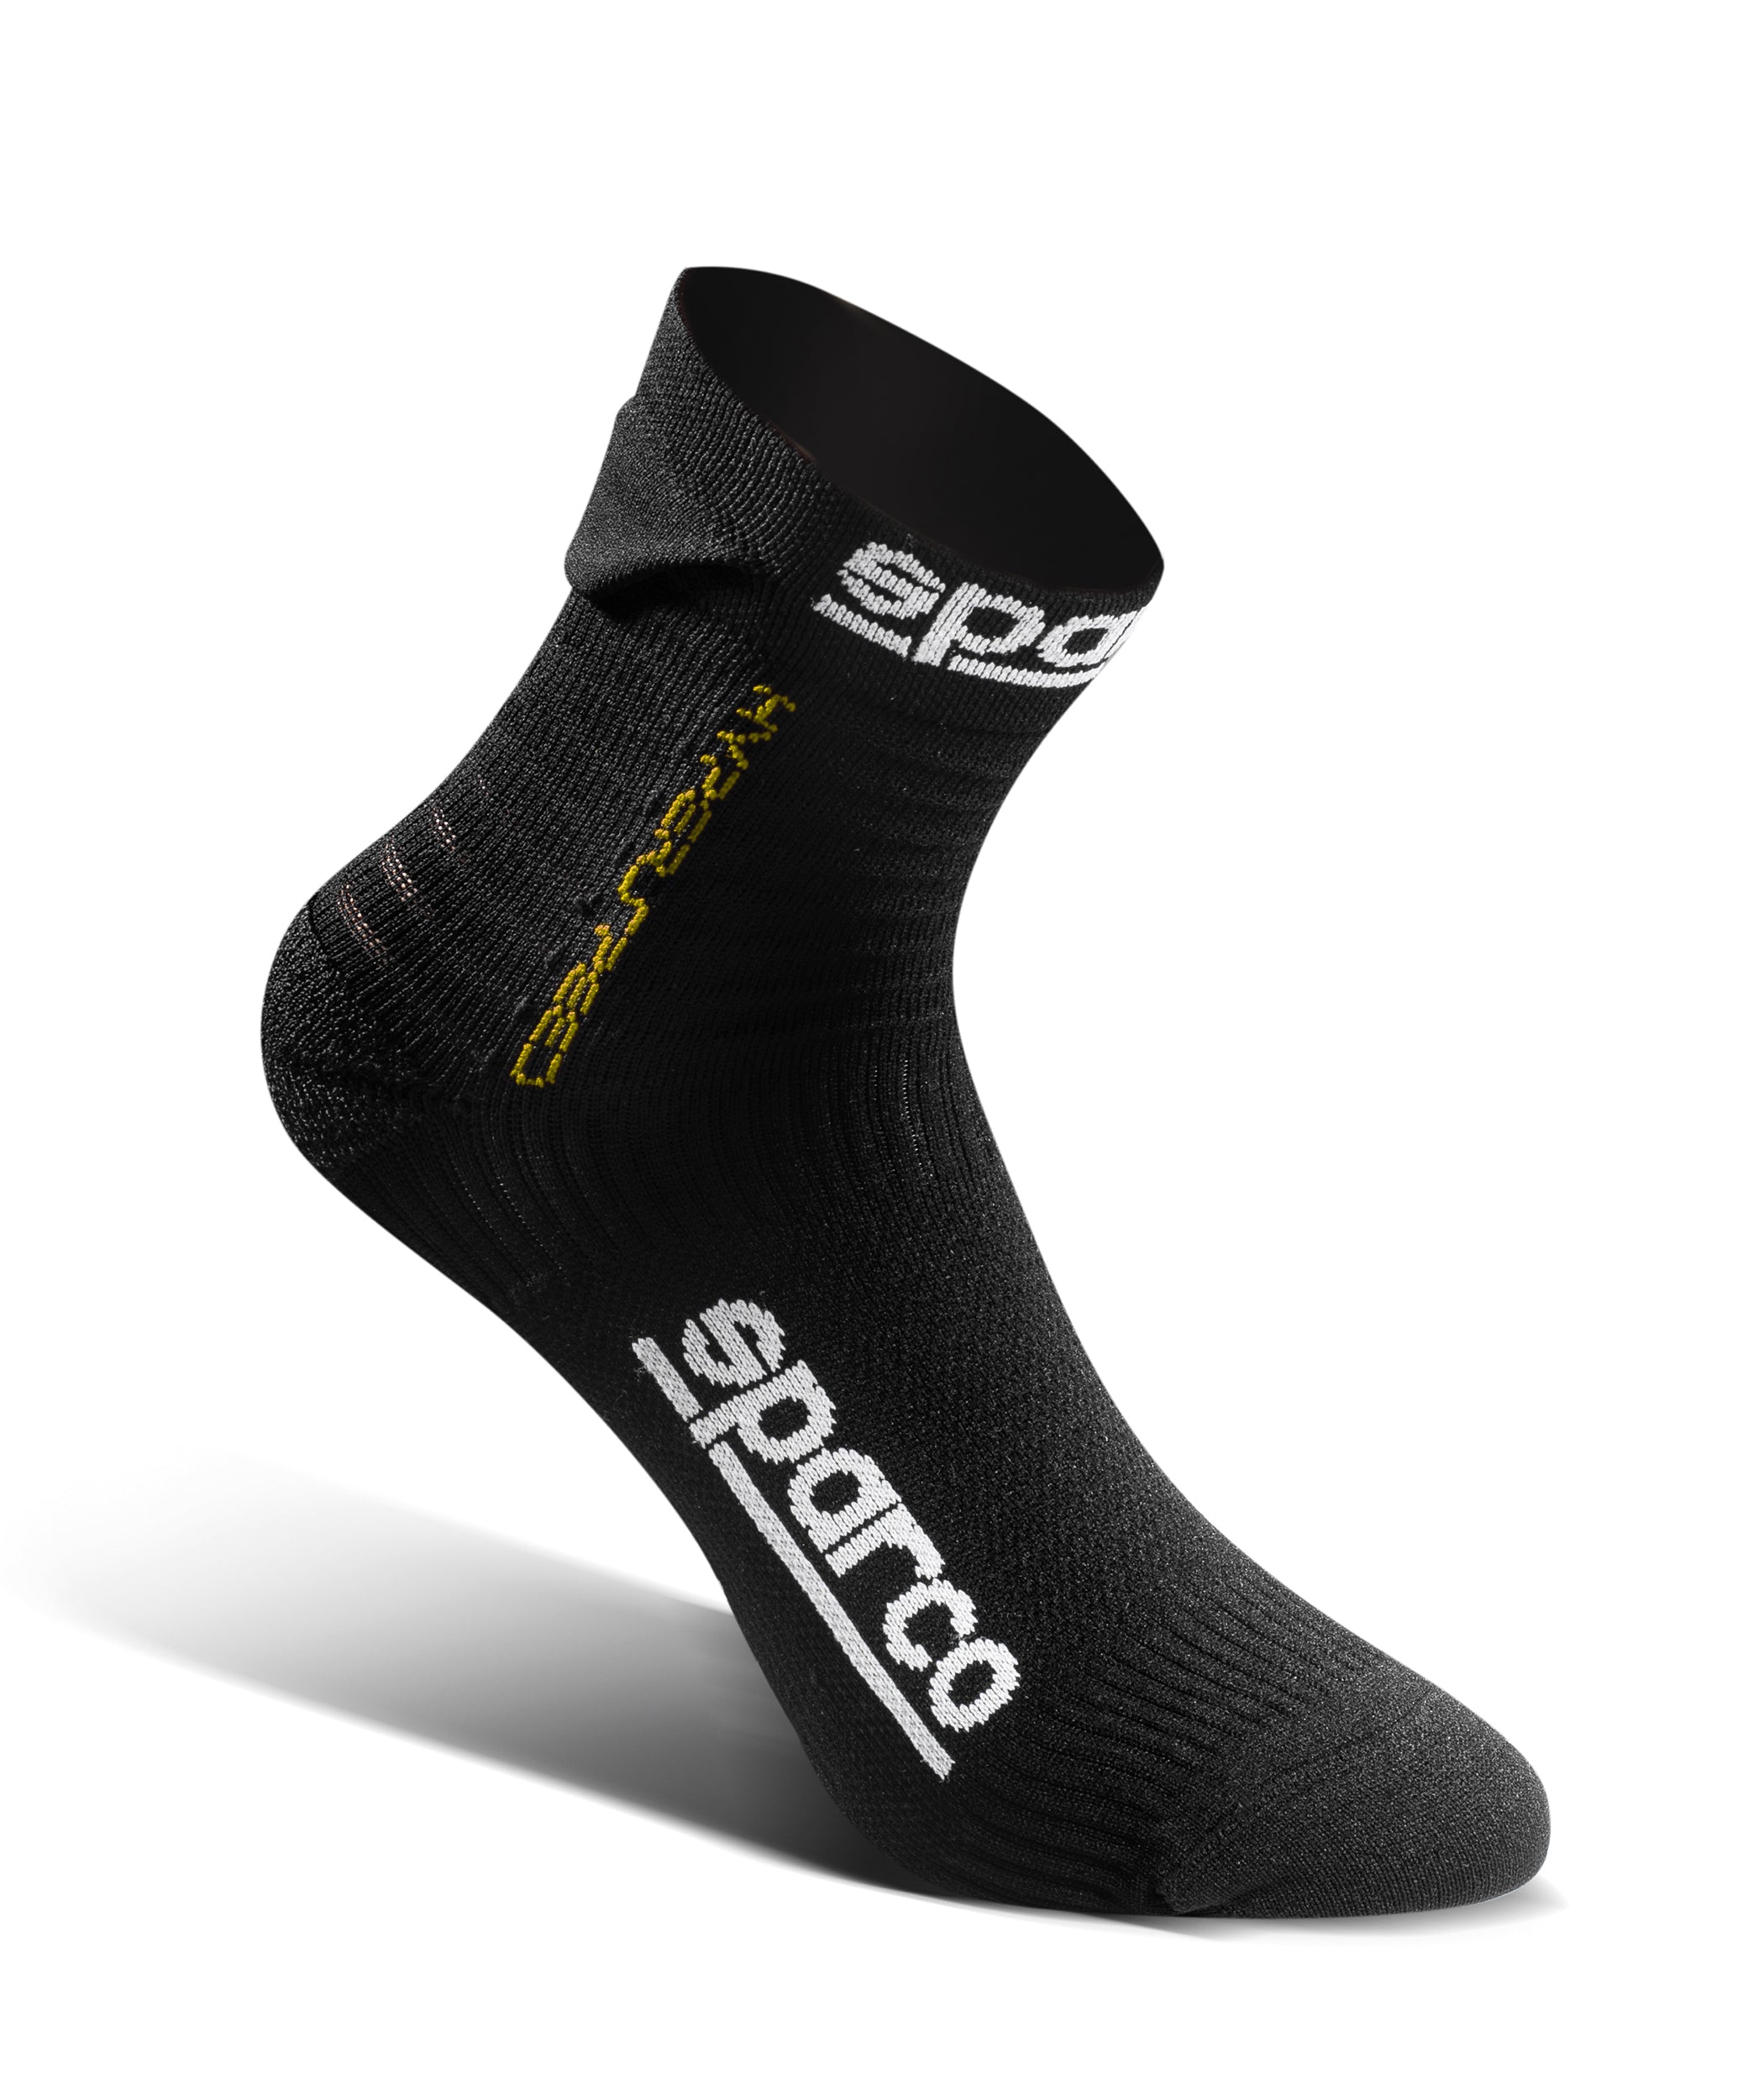 SPARCO 01290NRGF4041 Driving socks HYPERSPEED, black/yellow, size 40/41 Photo-0 